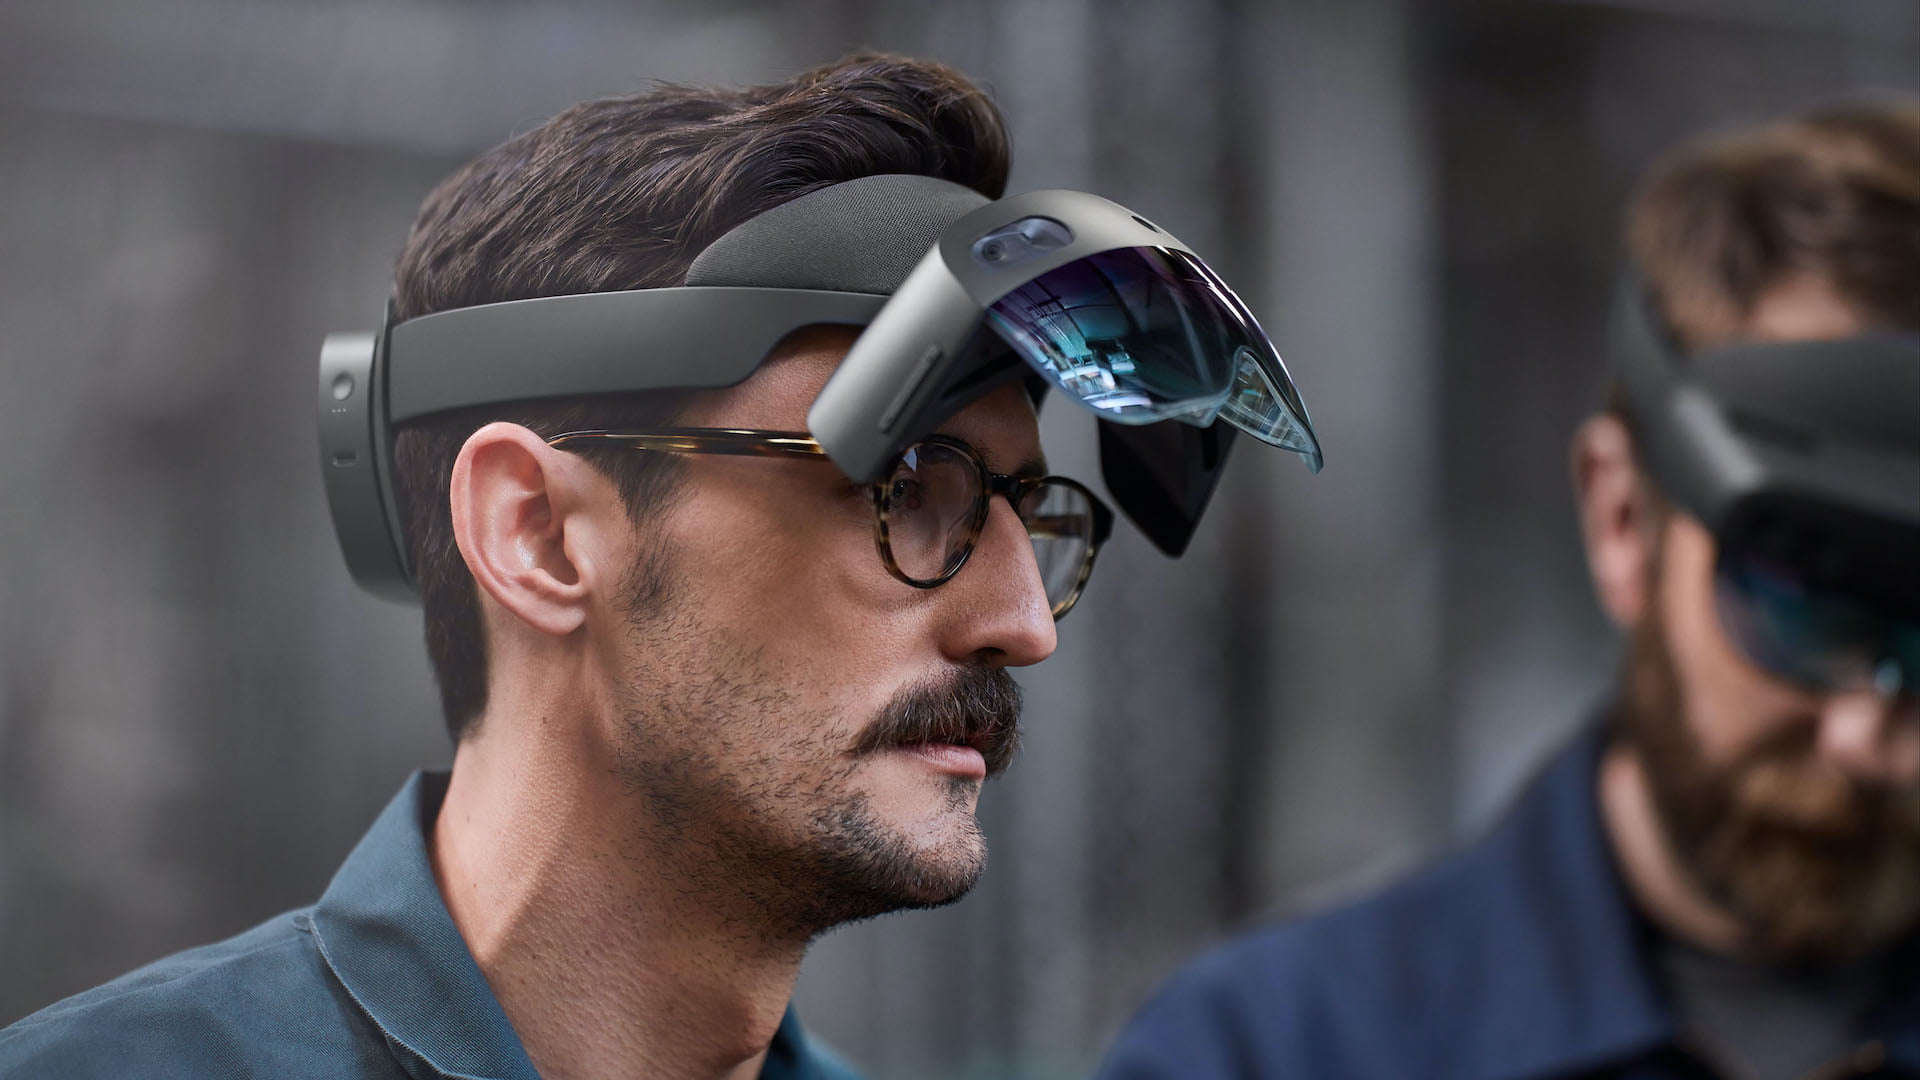 Microsoft has "no roadmap to speak of" for Hololens - report